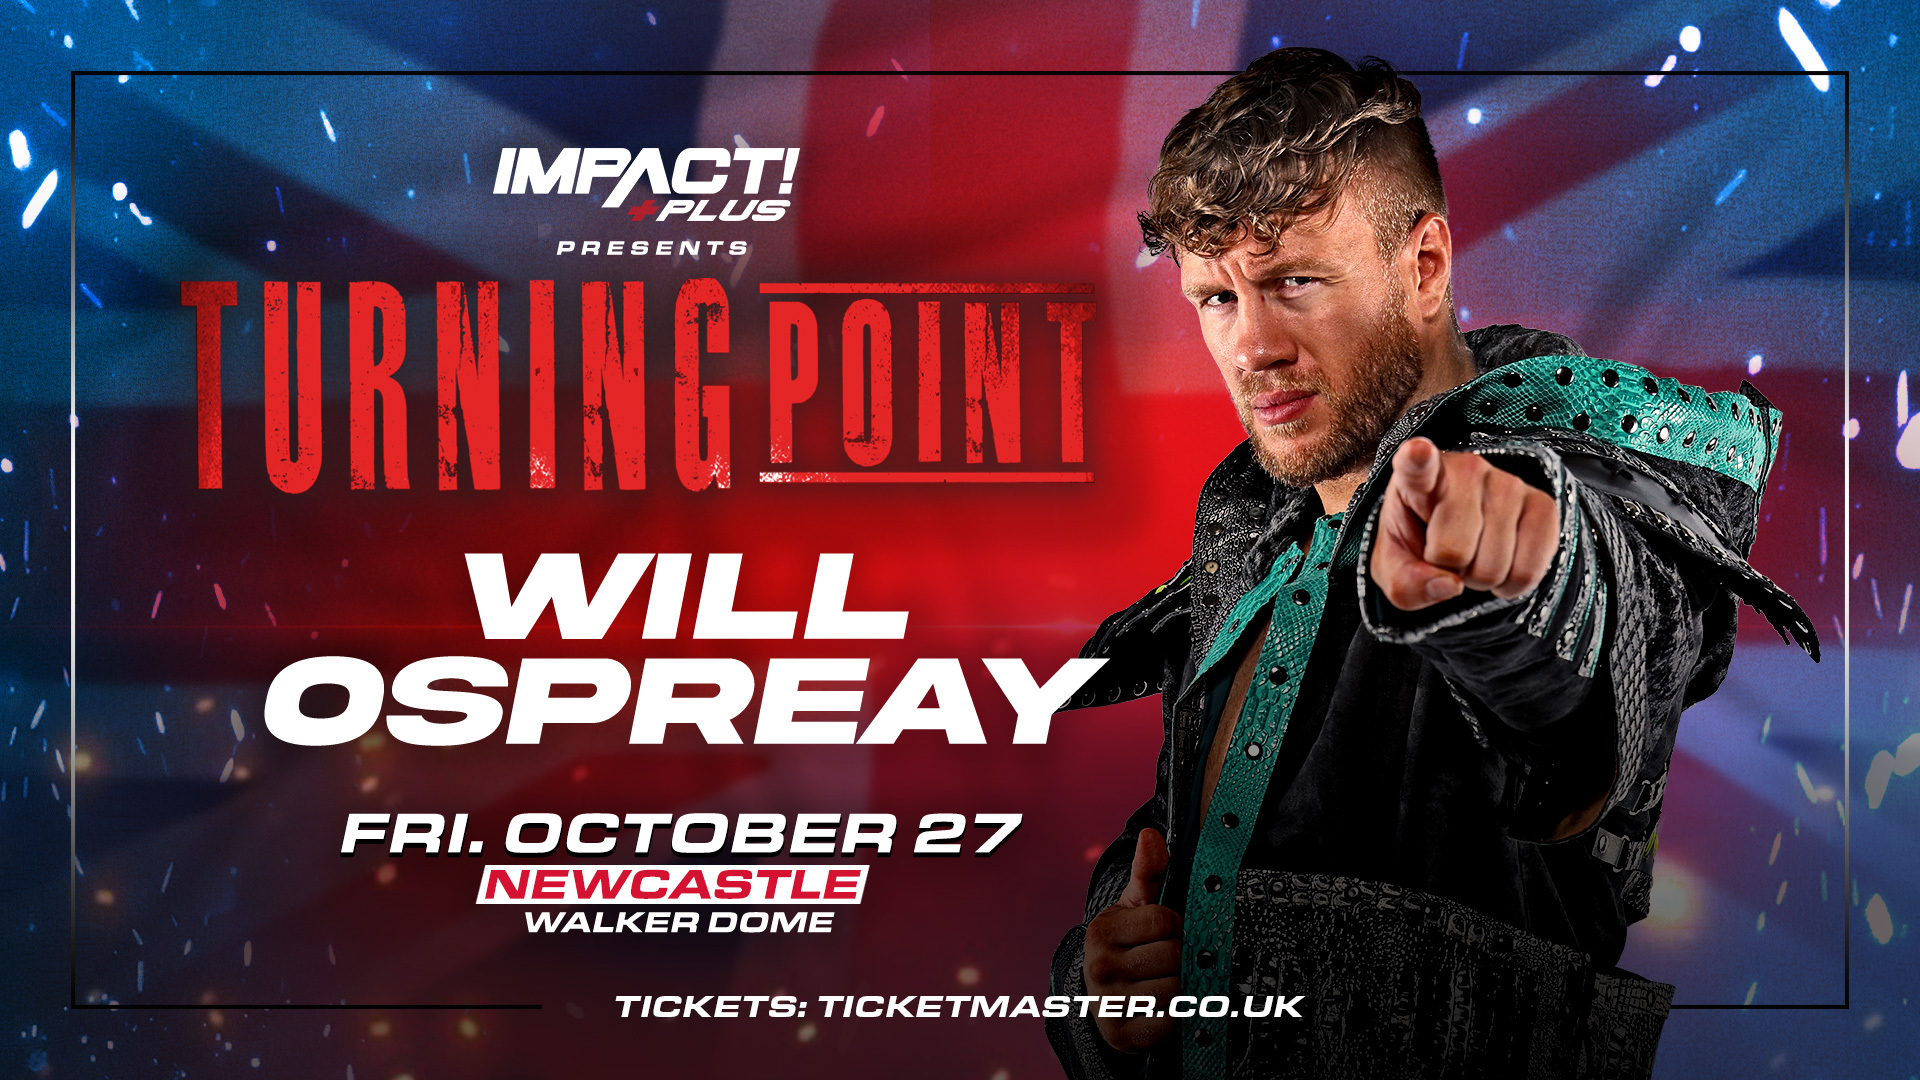 Will Ospreay to Appear at Turning Point on October 27th in Newcastle – IMPACT Wrestling